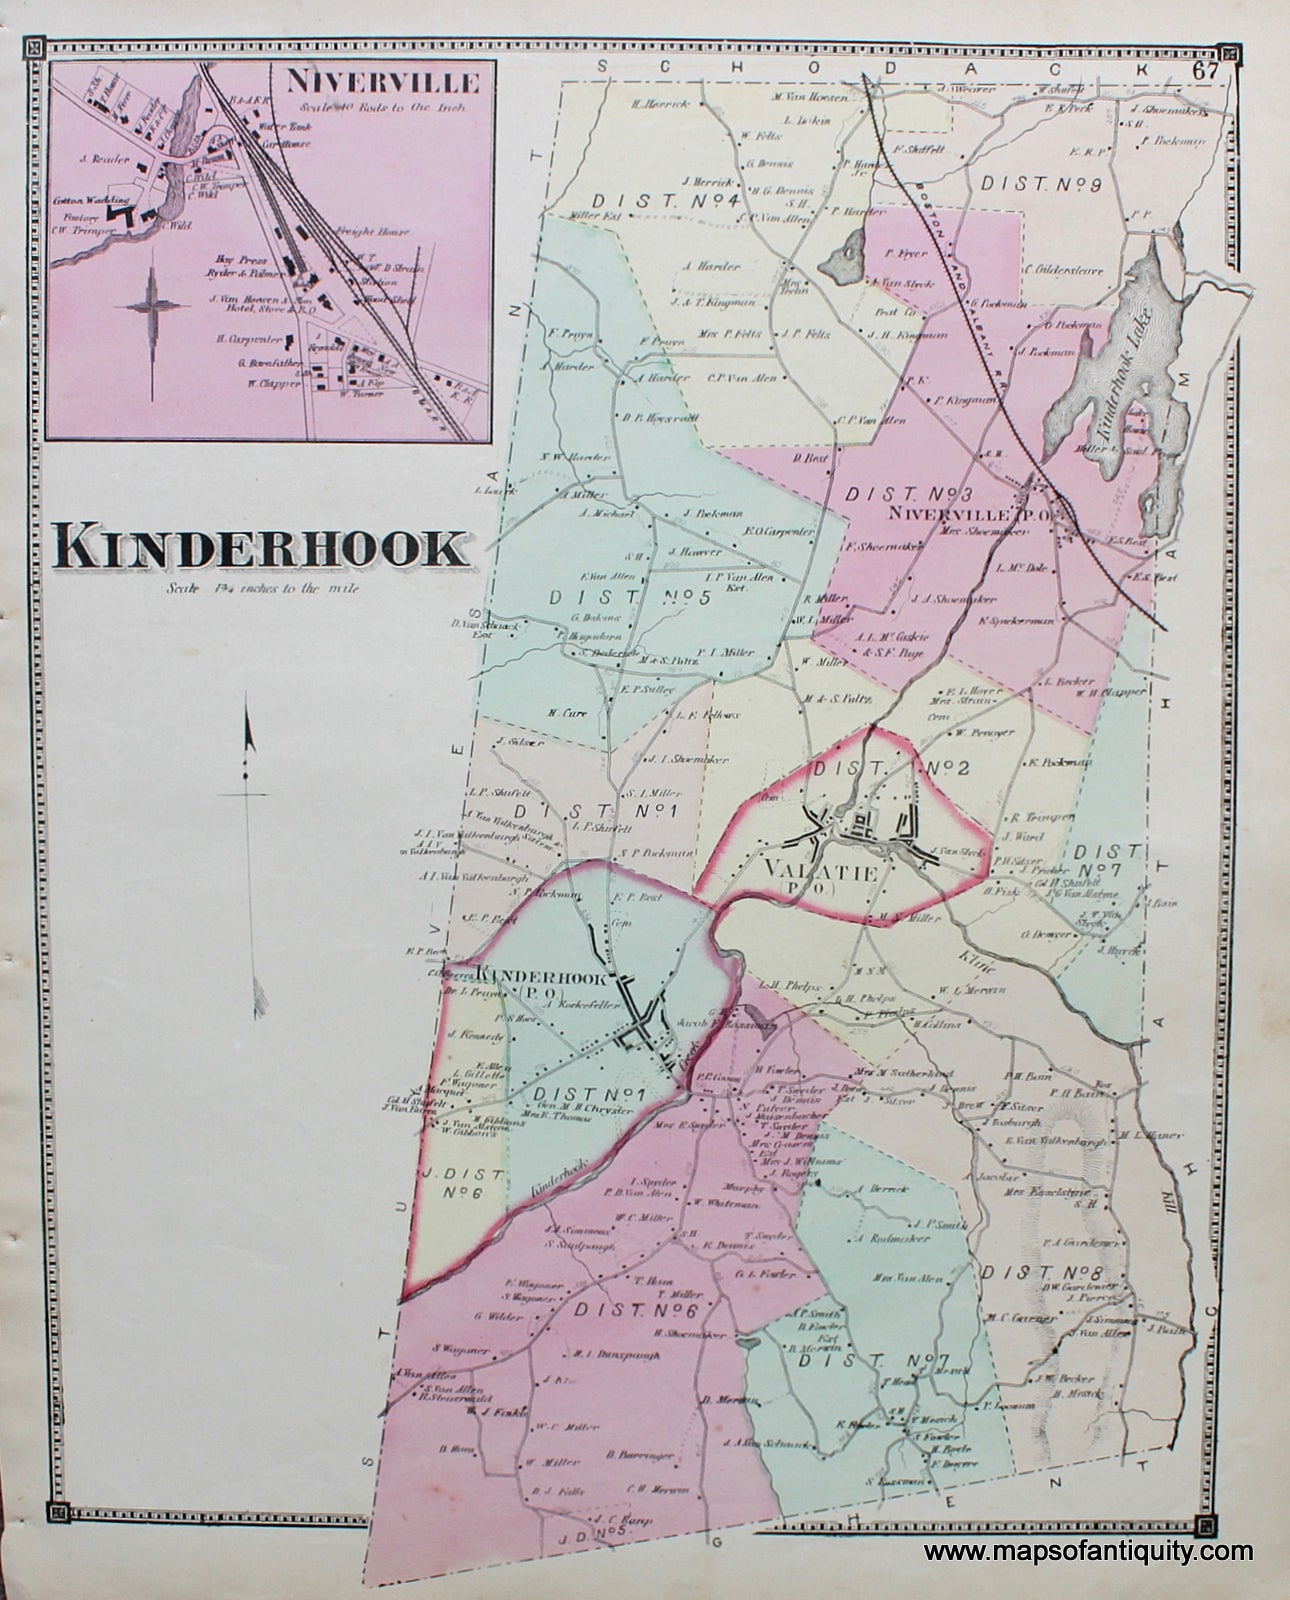 Antique-Hand-Colored-Map-Kinderhook-with-Niverville-(NY)-United-States-Northeast-1873-Beers-Maps-Of-Antiquity